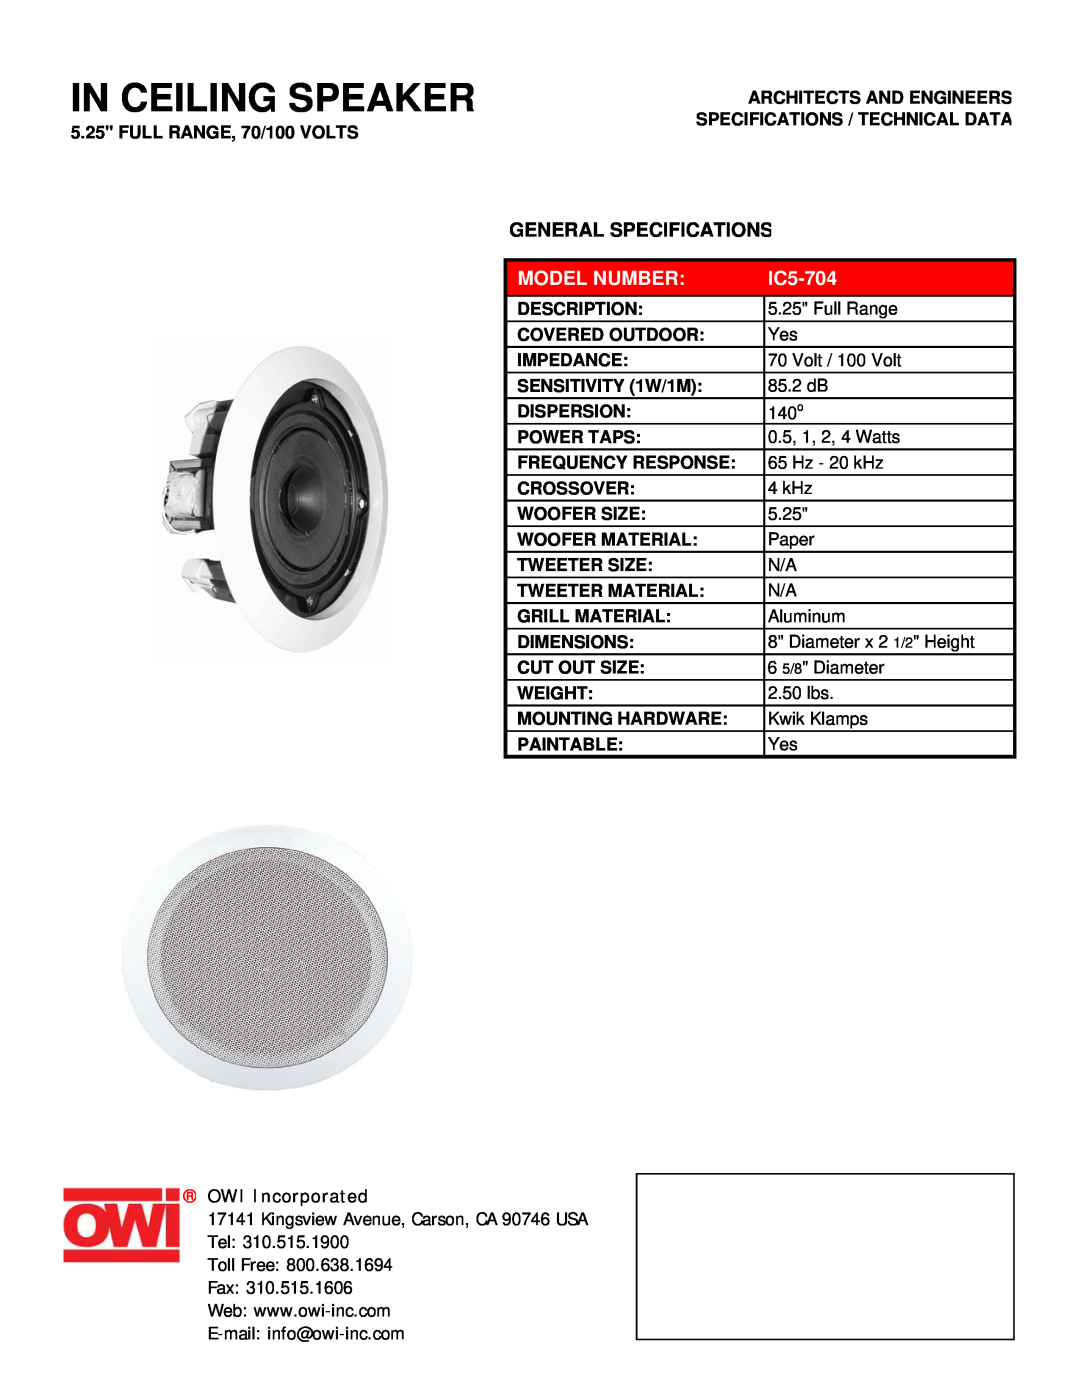 OWI IC5-704 specifications In Ceiling Speaker, General Specifications, Model Number, OWI Incorporated 